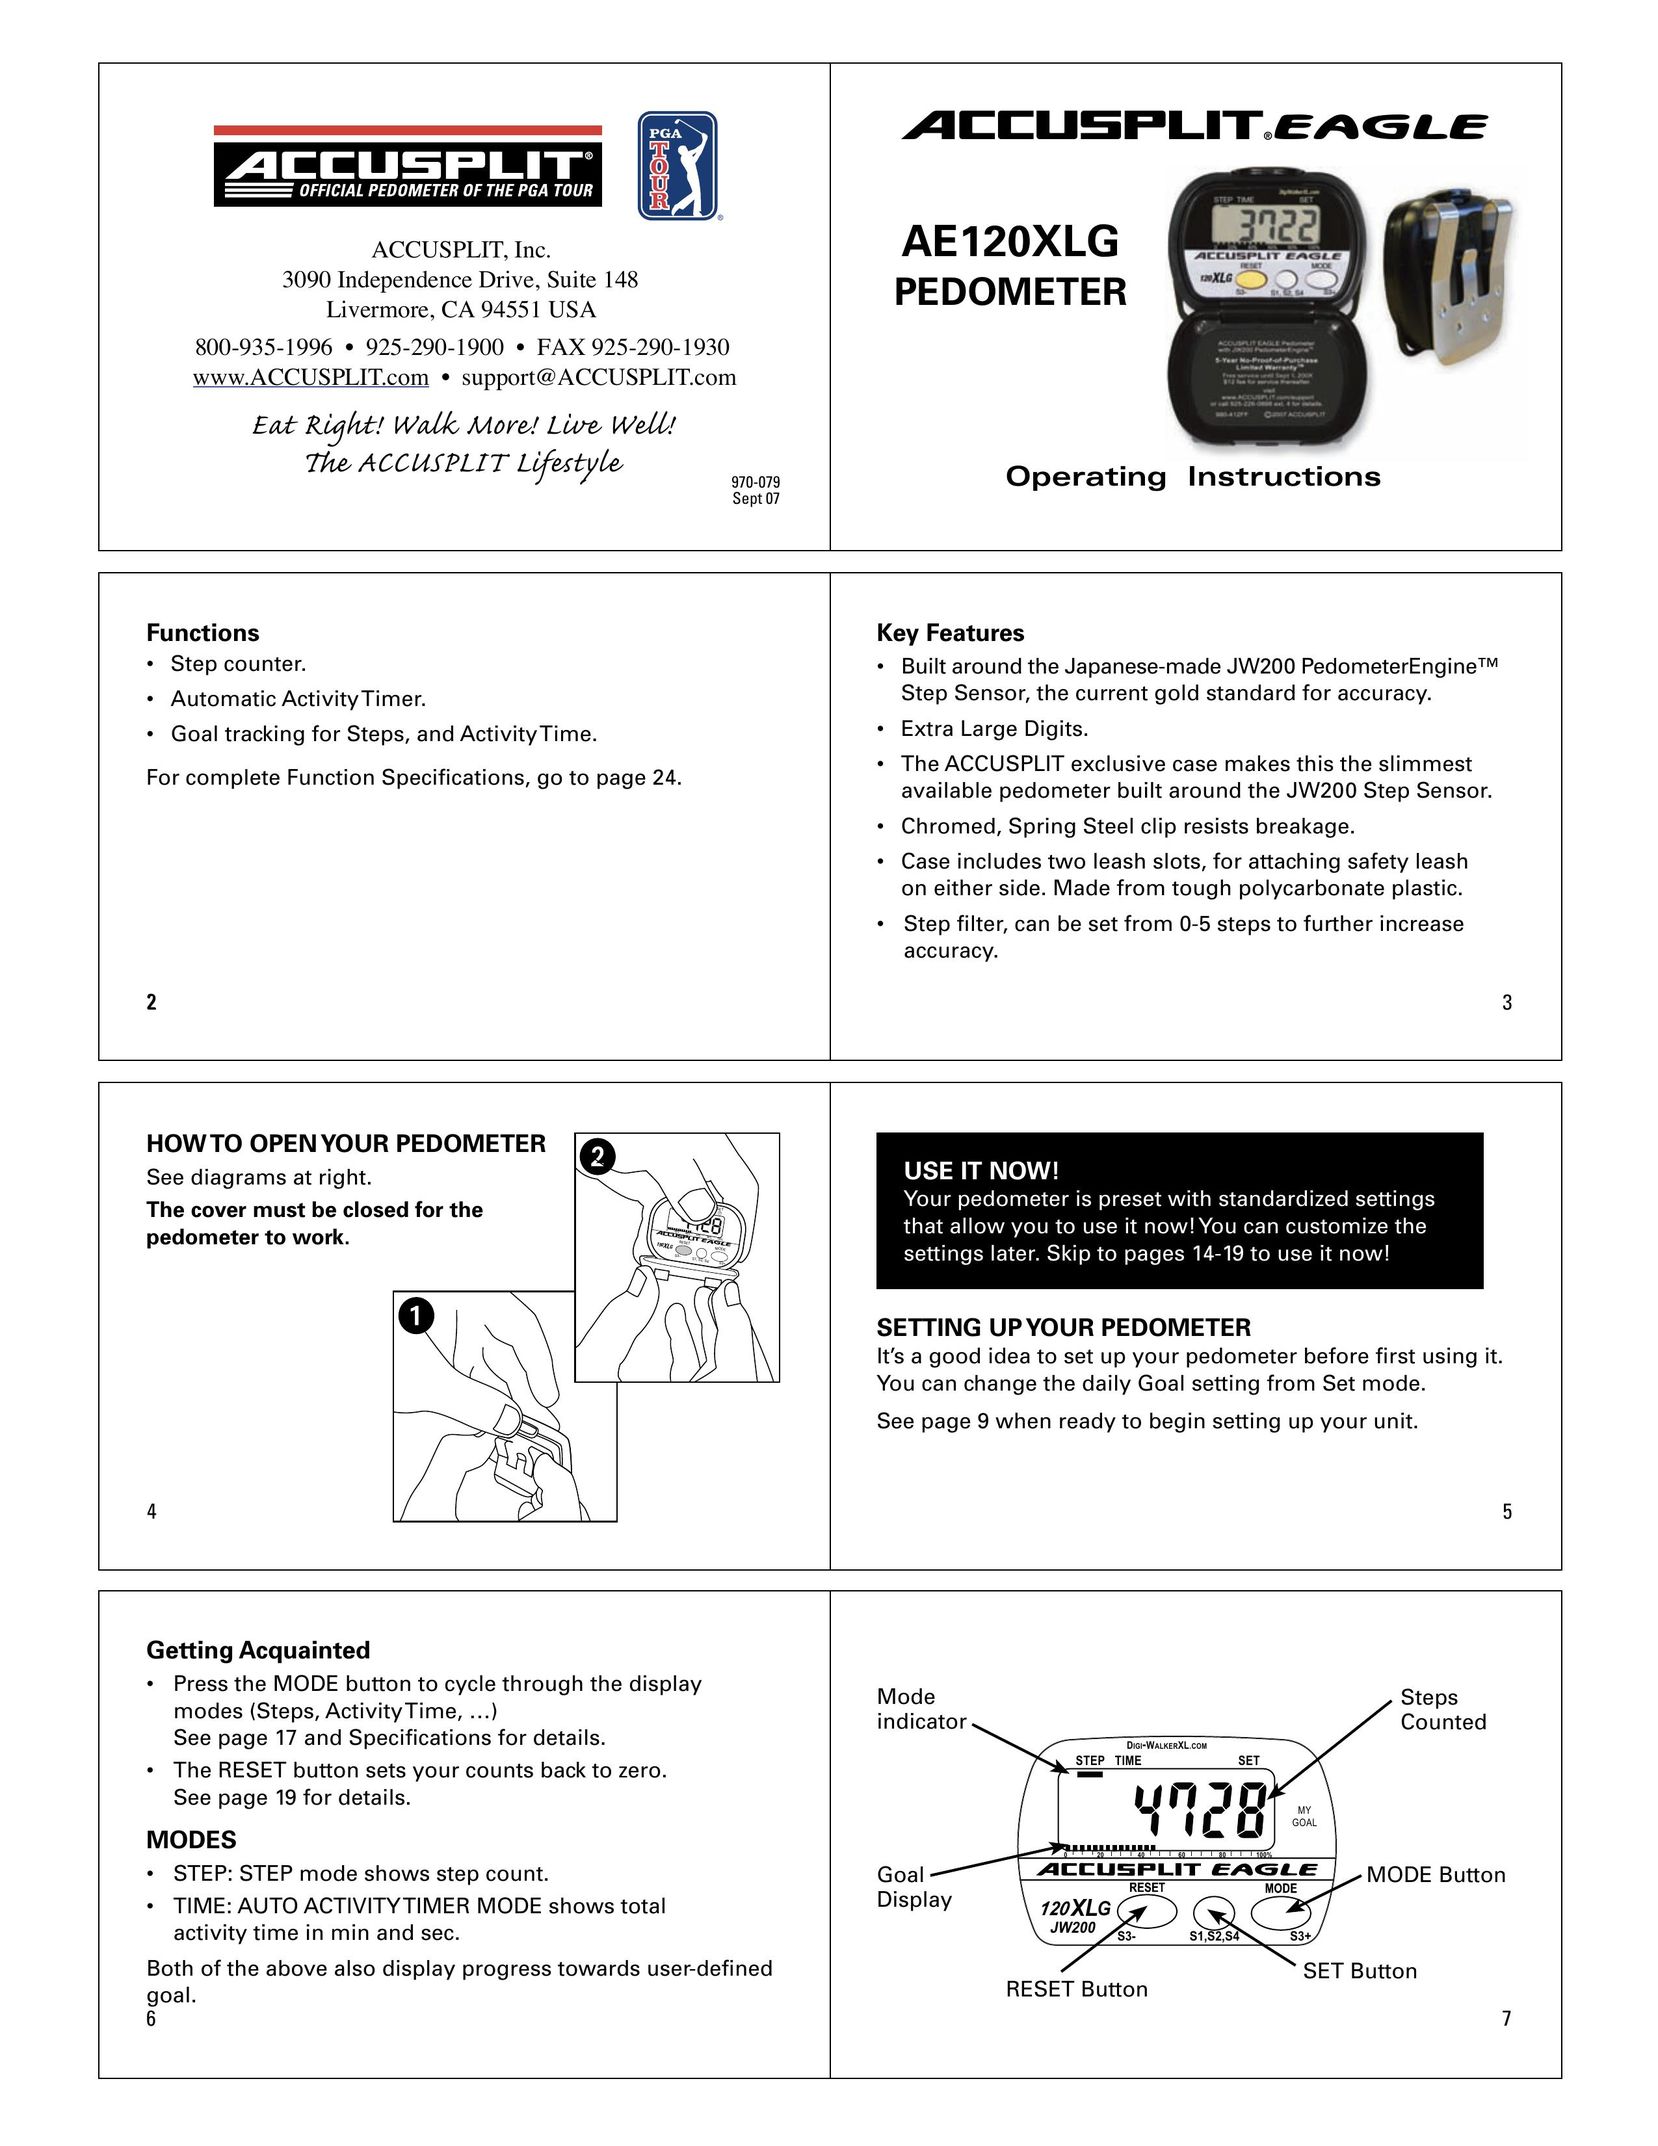 Accusplit AE120XLG Fitness Electronics User Manual